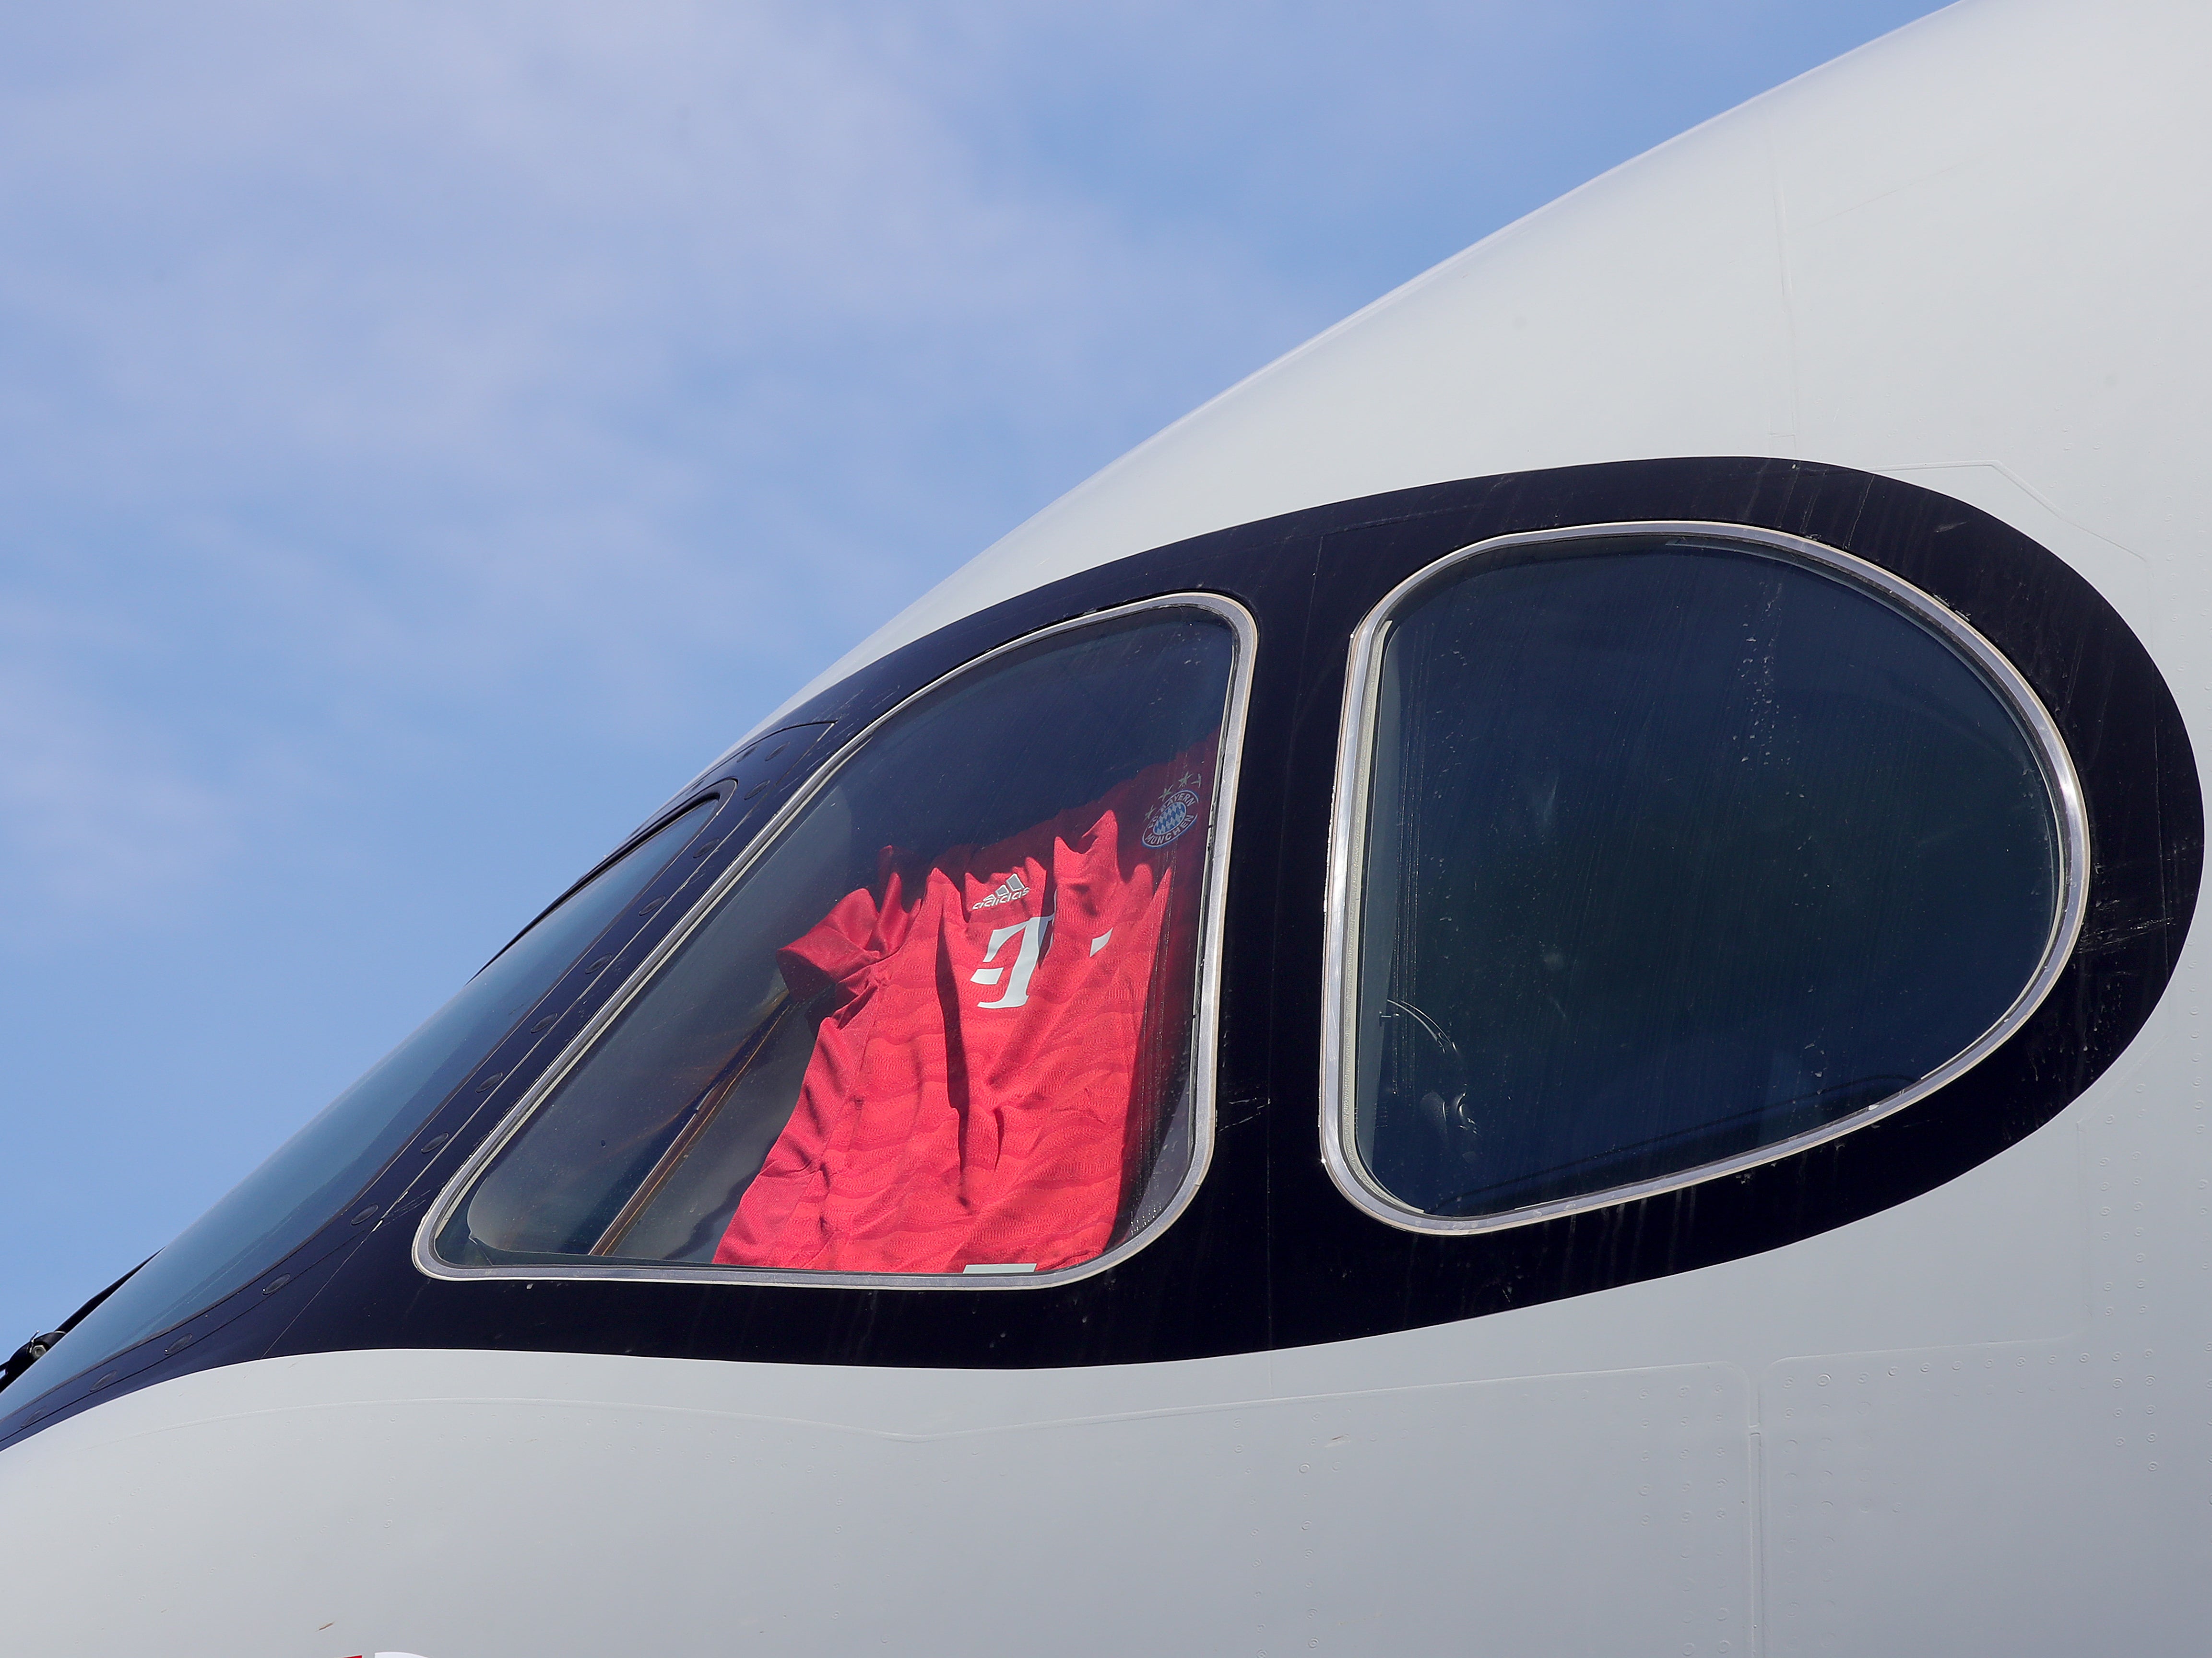 A Bayern shirt is displayed in the cockpit window of a Qatar Airways plane during a preseason tour